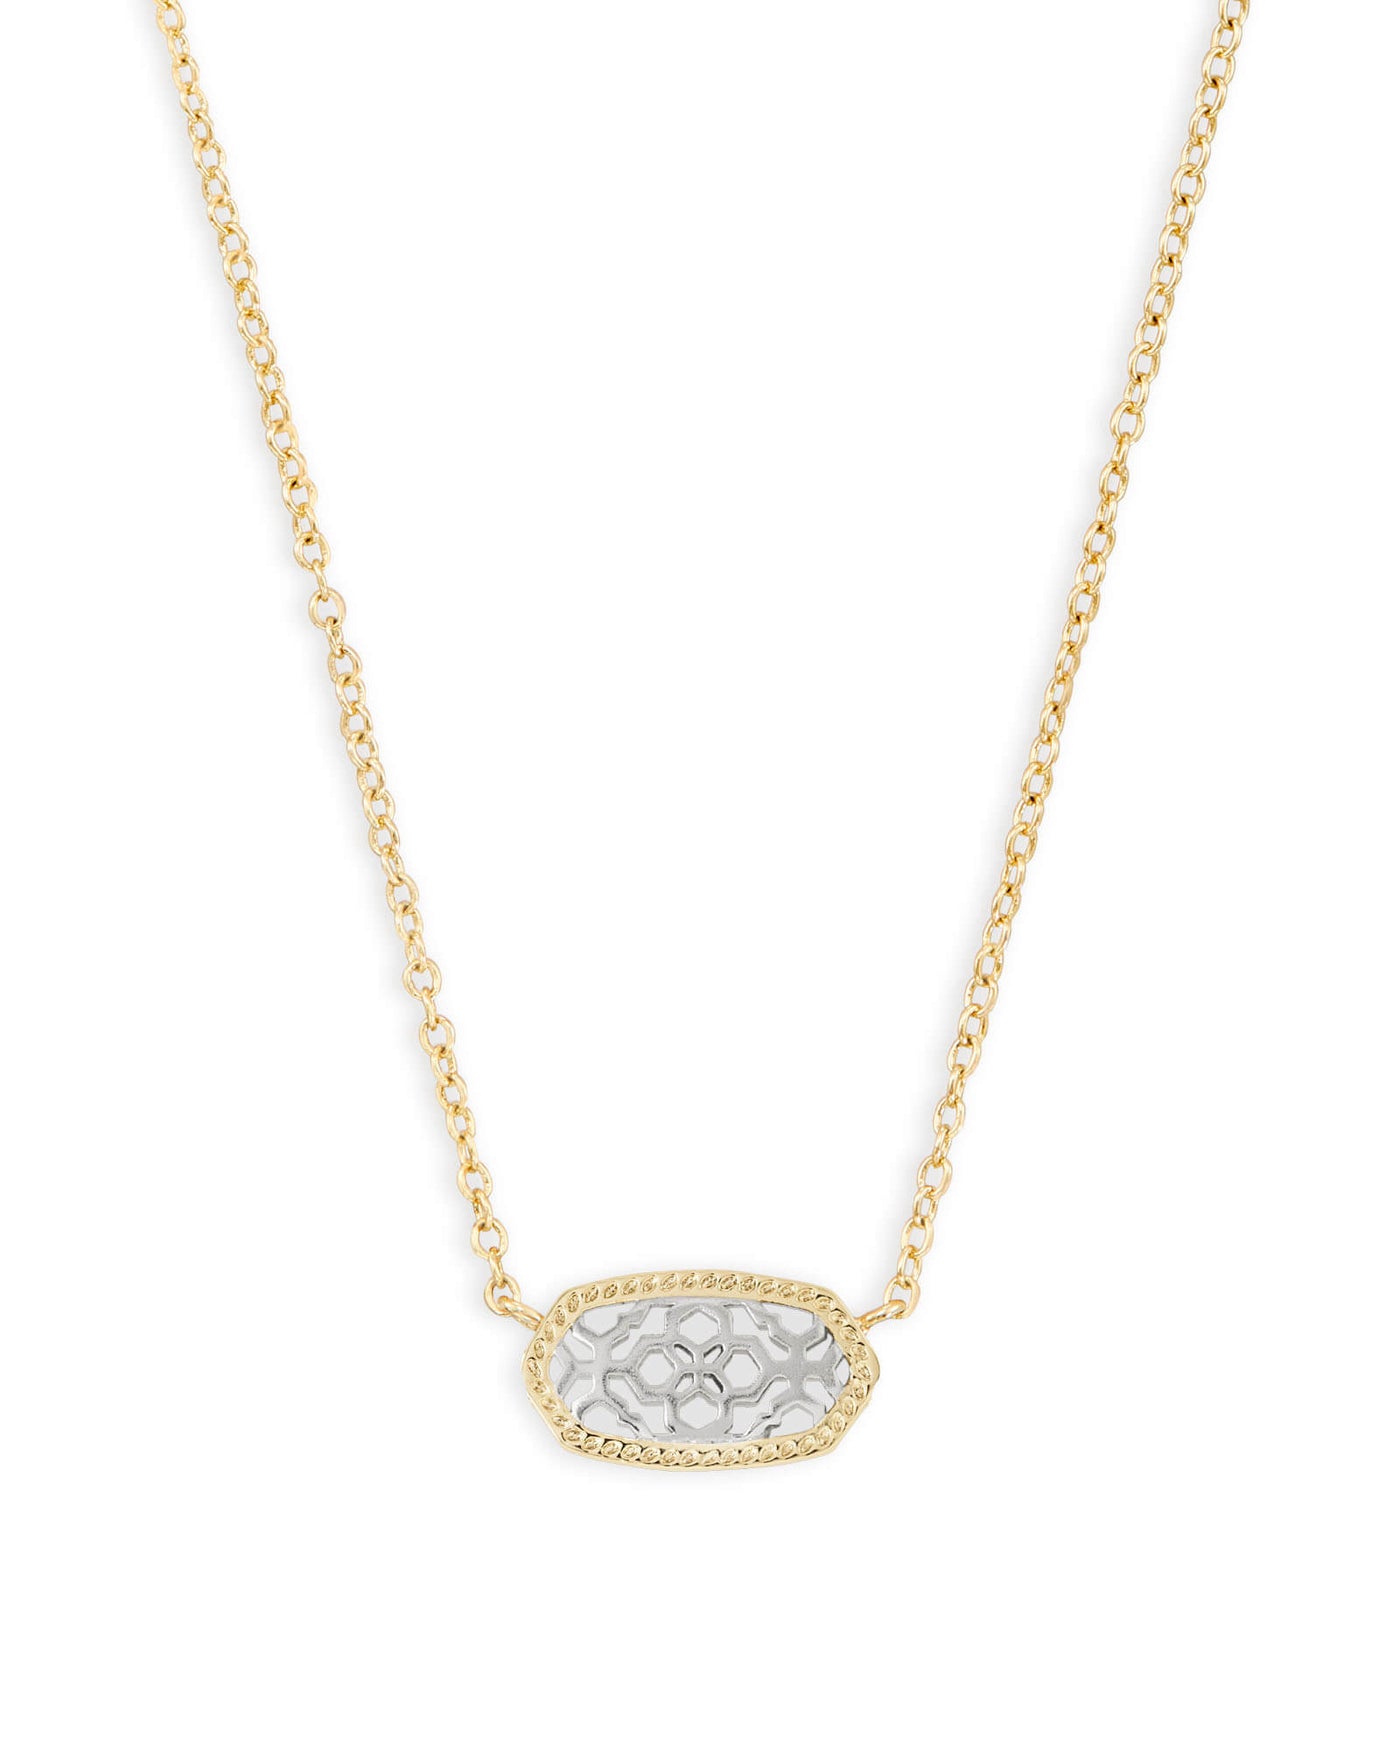 Kendra Scott Elisa Pendant Gold Necklace in Gold - Rhodium Filigree Mix-Necklaces-Kendra Scott-Market Street Nest, Fashionable Clothing, Shoes and Home Décor Located in Mabank, TX